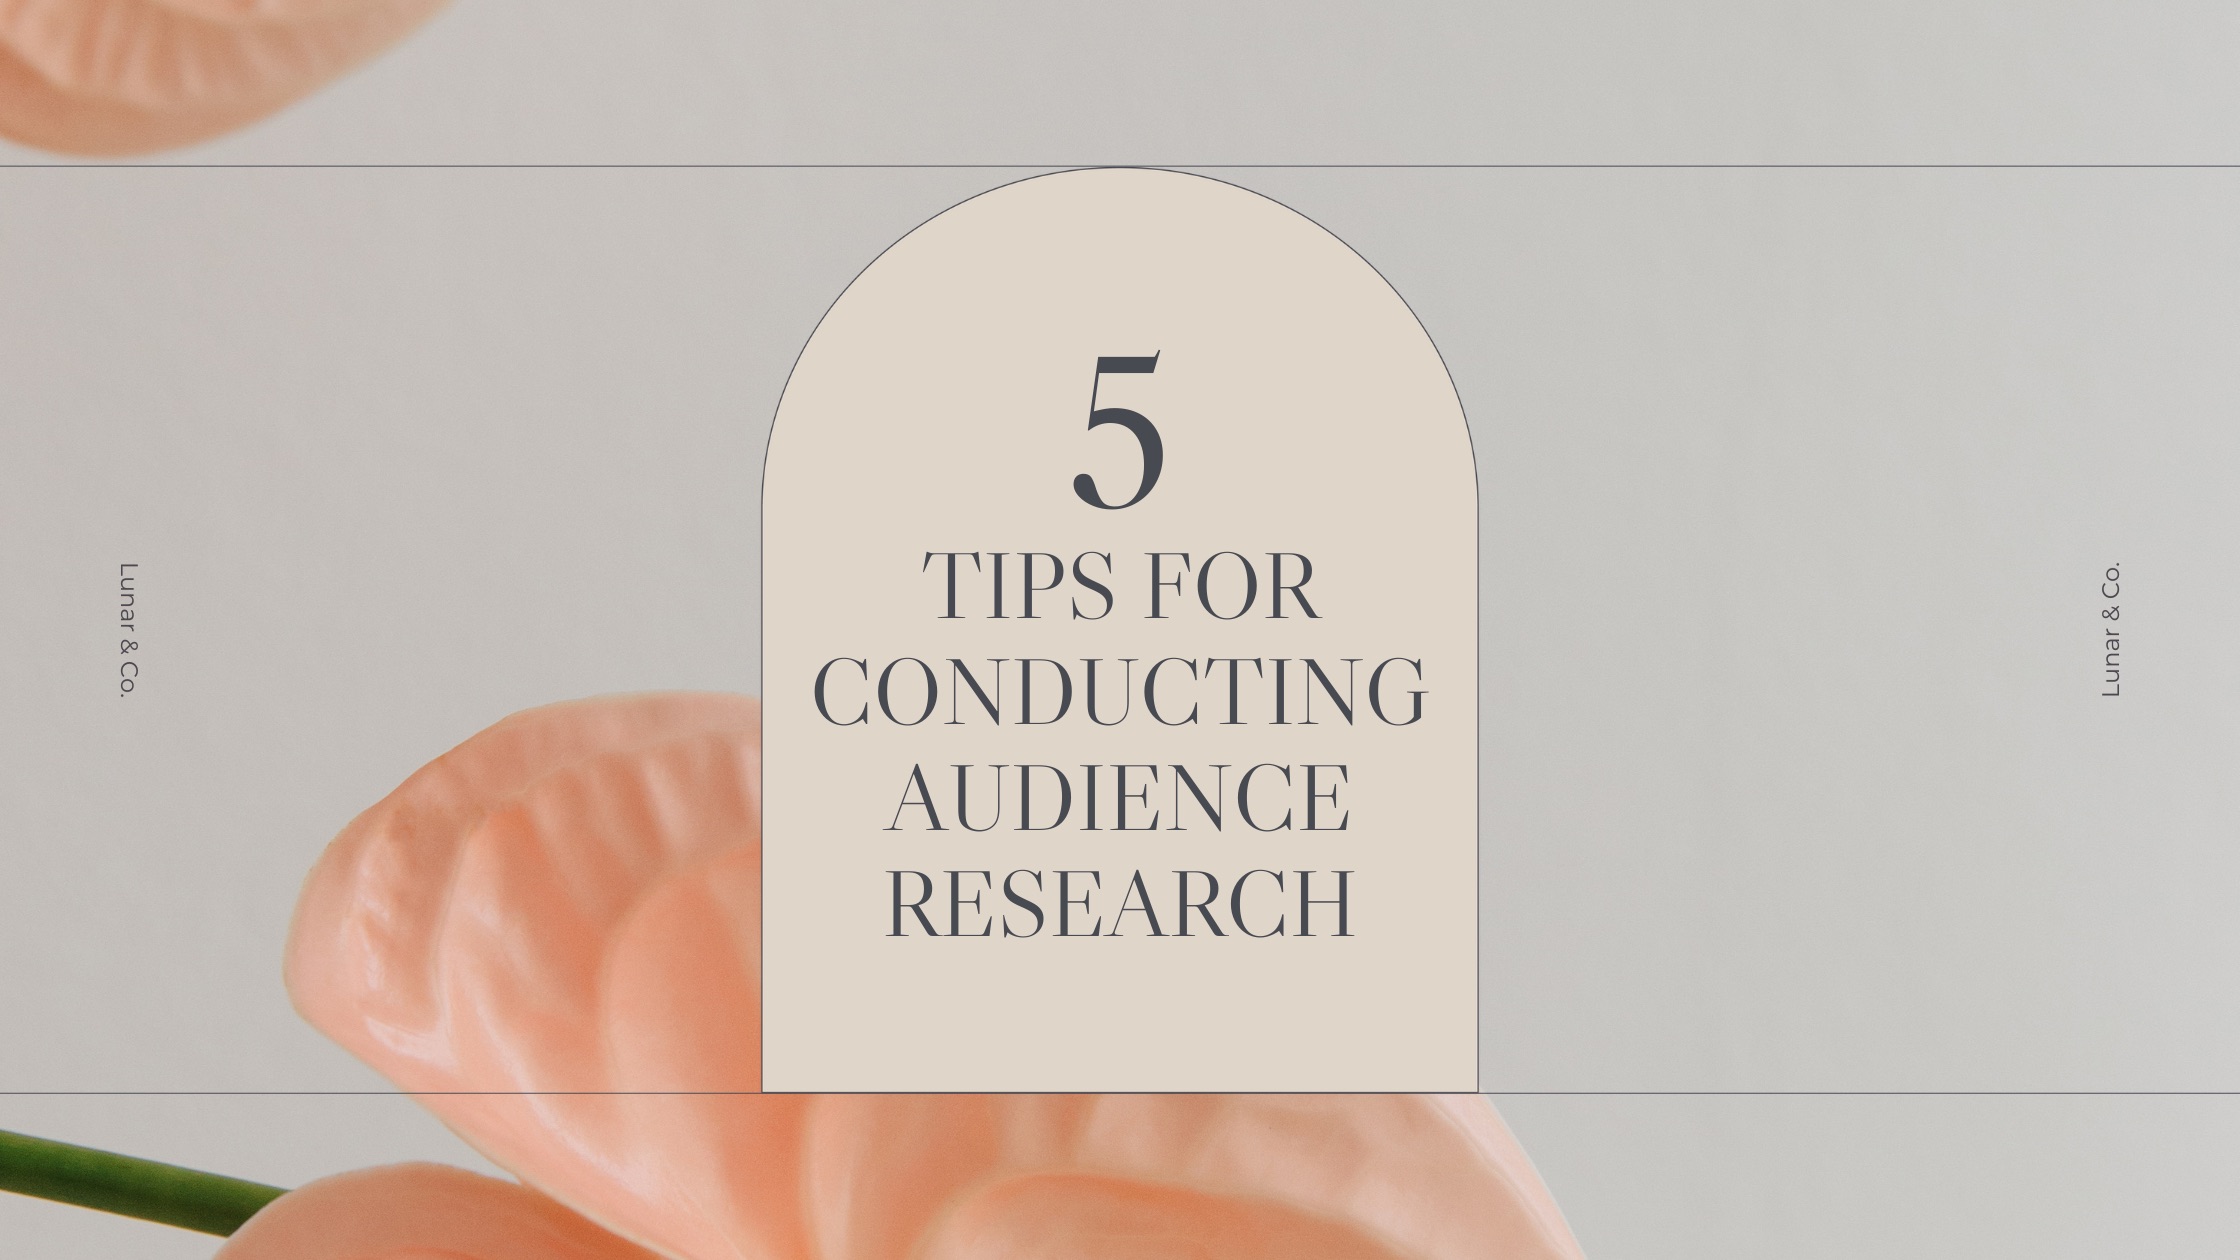 Audience Research Tips Lunar